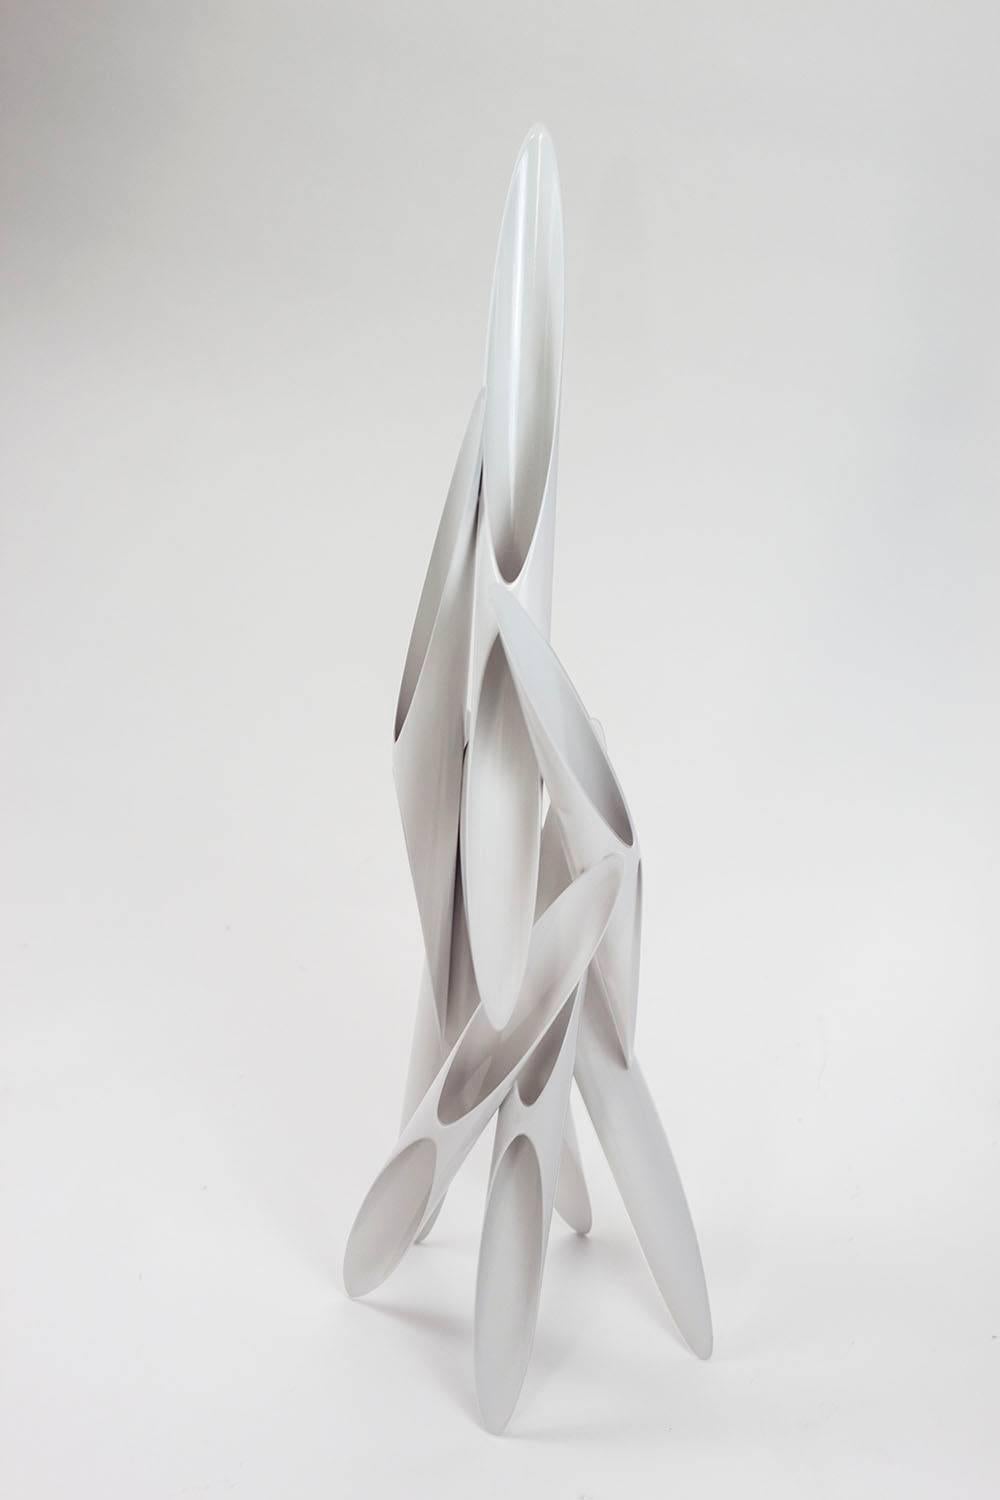 Biased sliced aluminium tubes painted white. A larger scale version of 